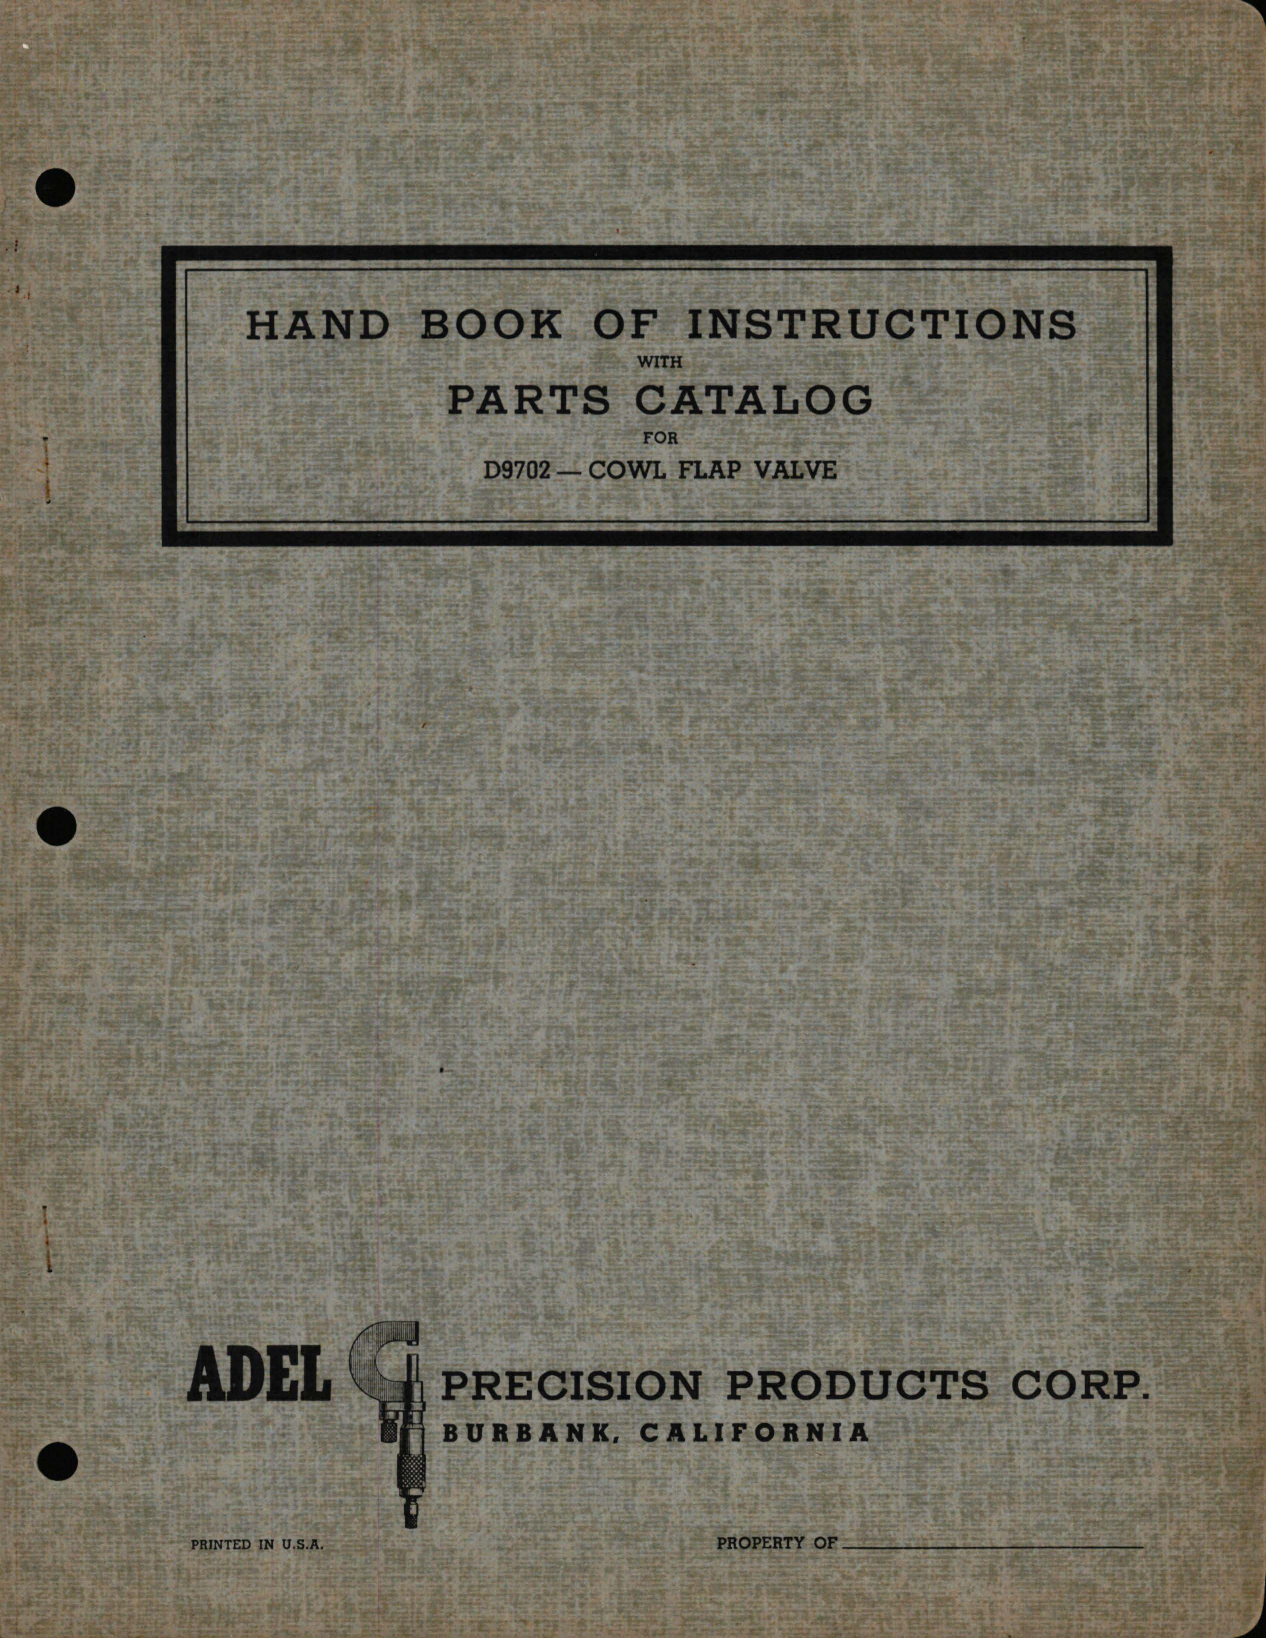 Sample page 1 from AirCorps Library document: Instructions with Parts Catalog for Cowl Flap Valve - D9702